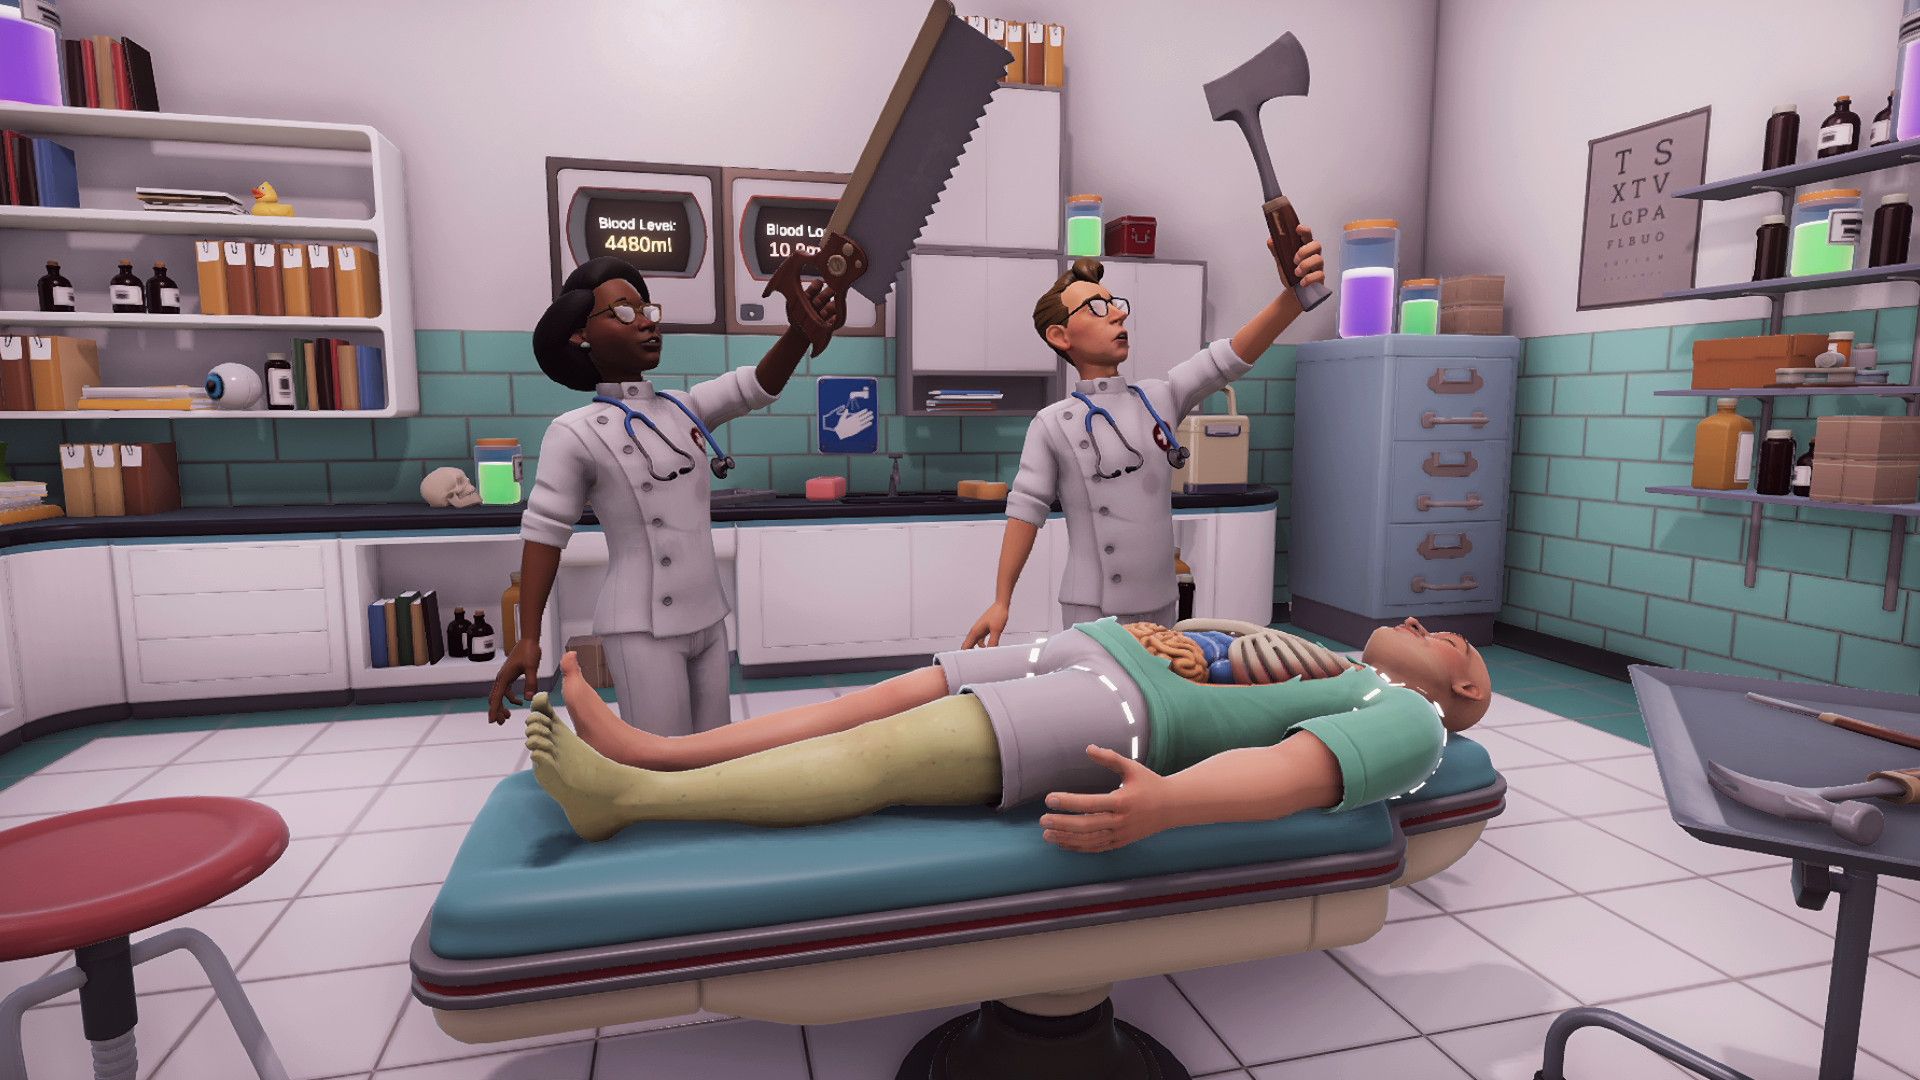 Surgeon Simulator 2 launches this August with multiplayer and a